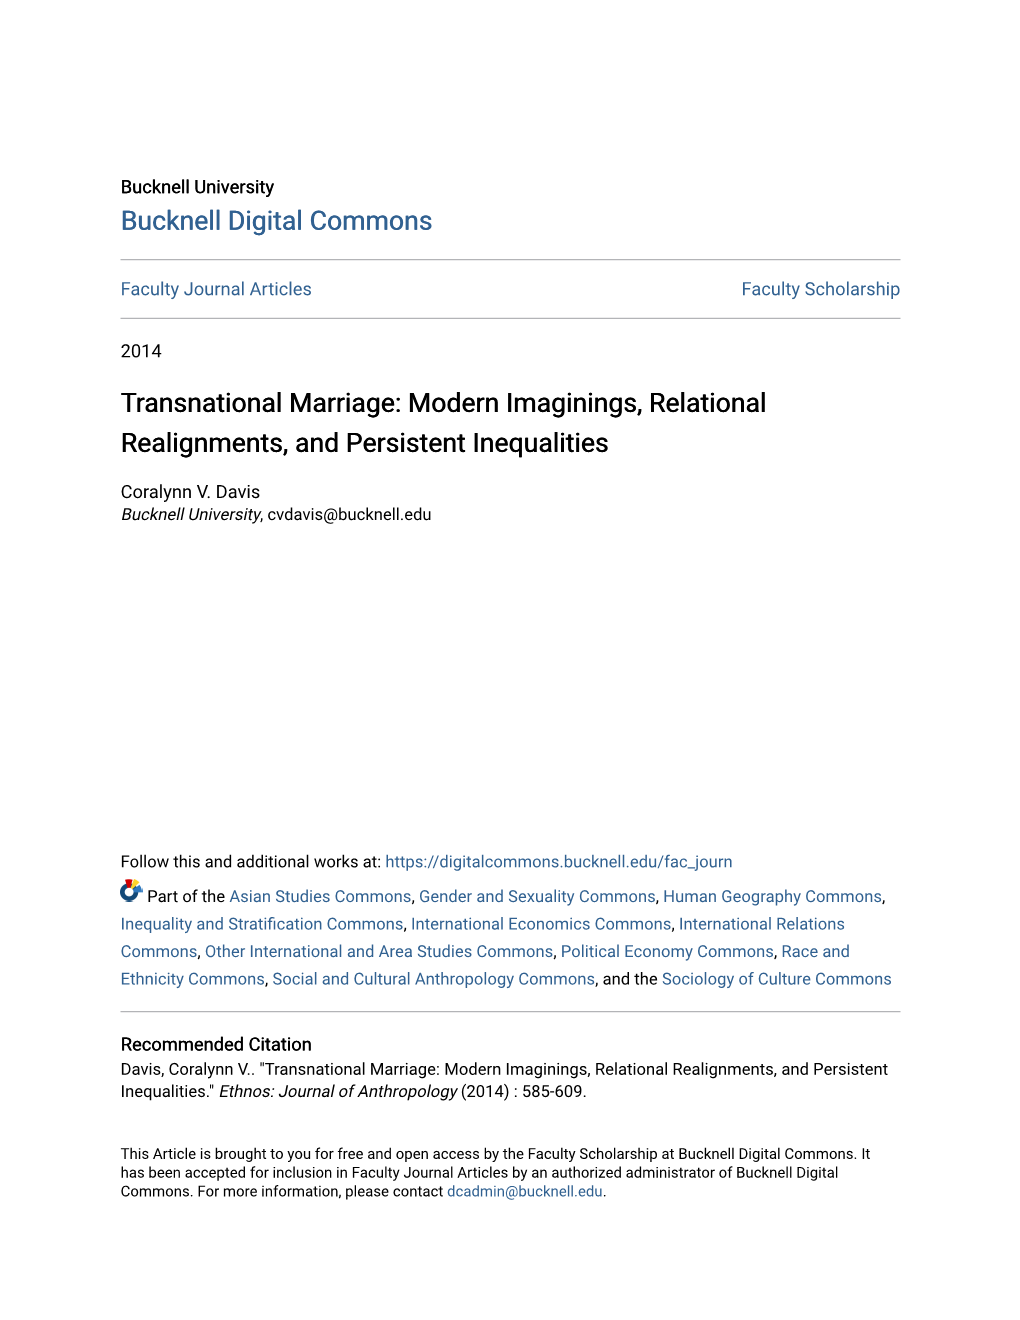 Transnational Marriage: Modern Imaginings, Relational Realignments, and Persistent Inequalities